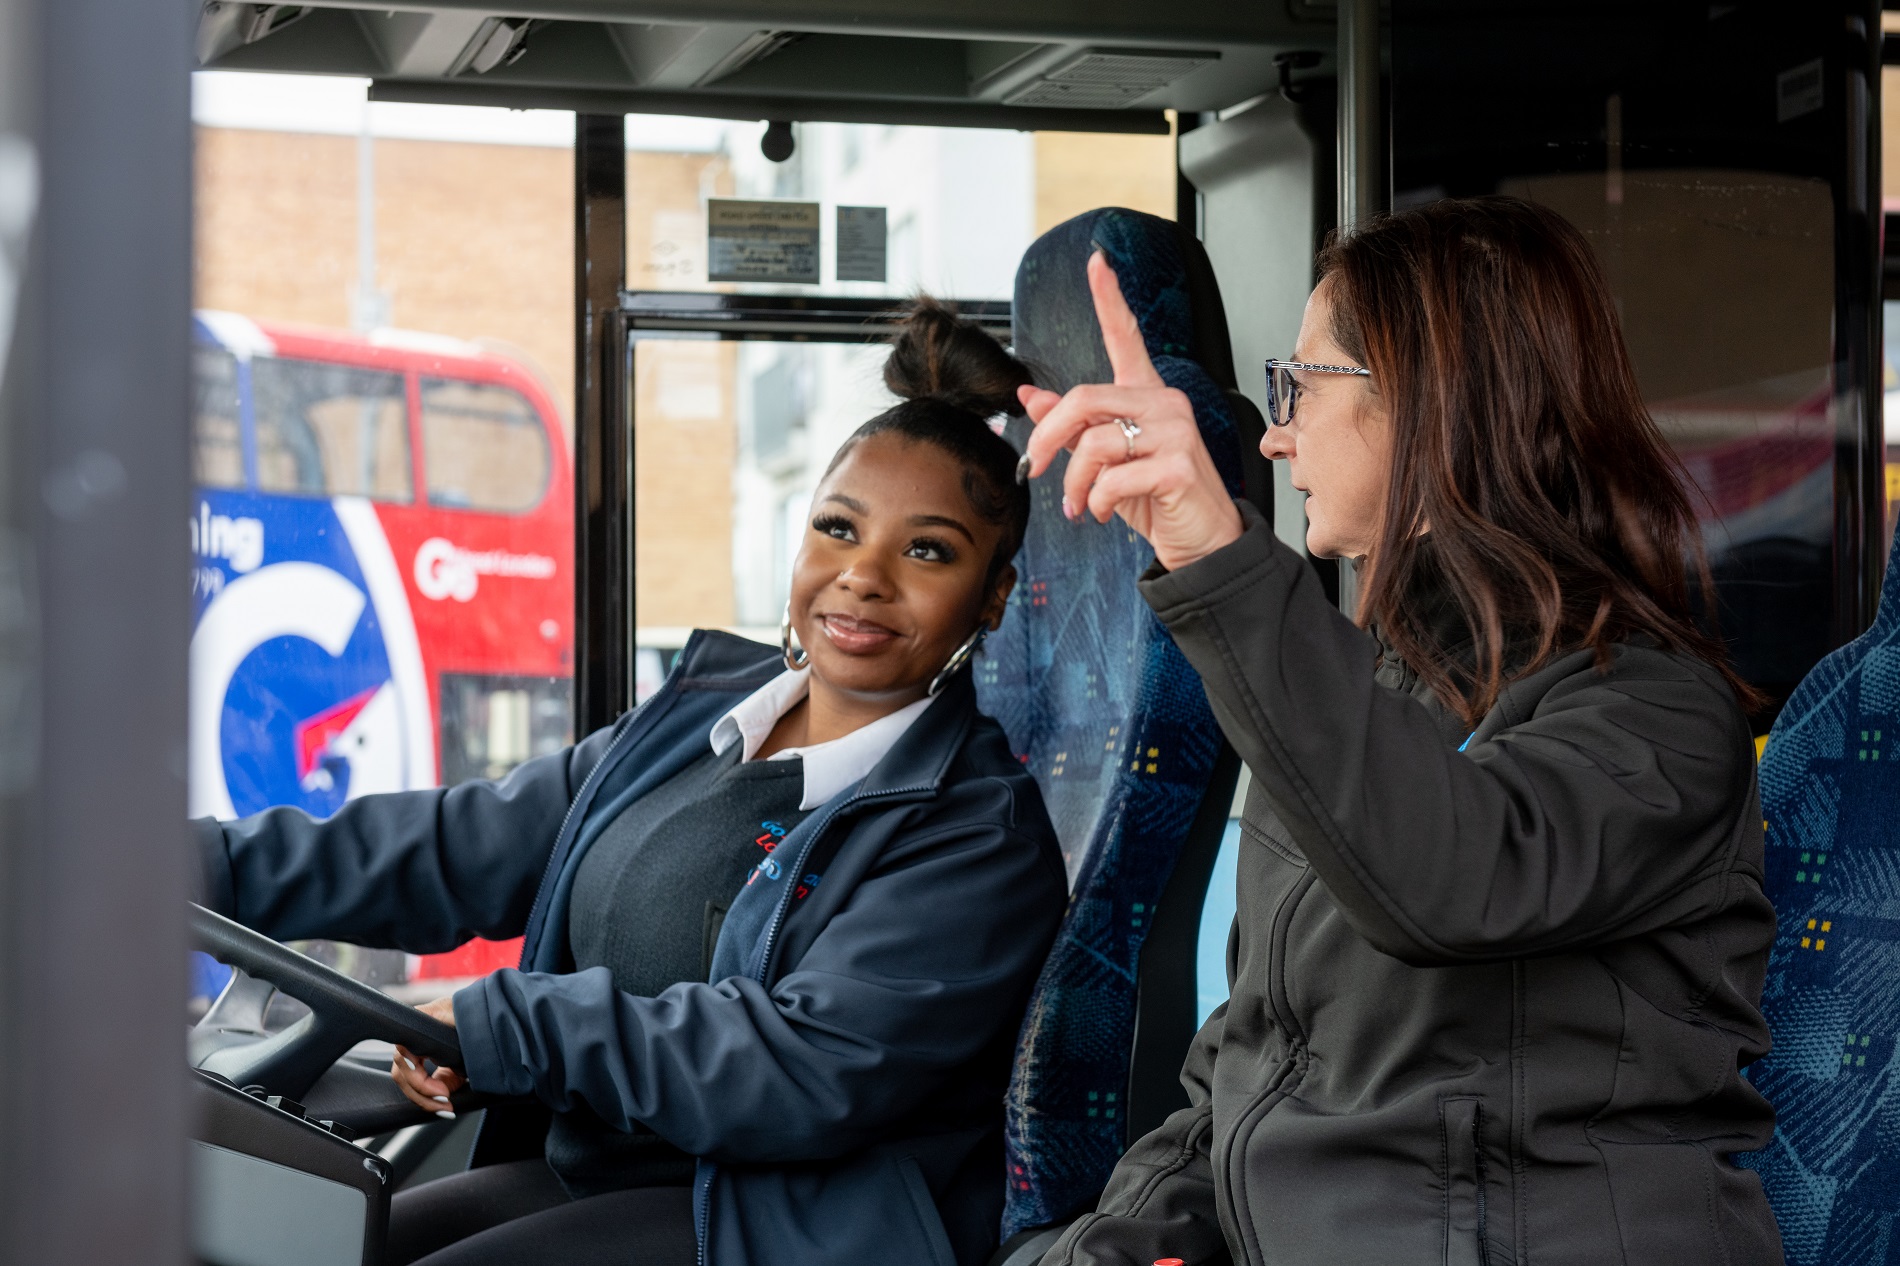 Go-Ahead proud to sponsor Women in Bus and Coach